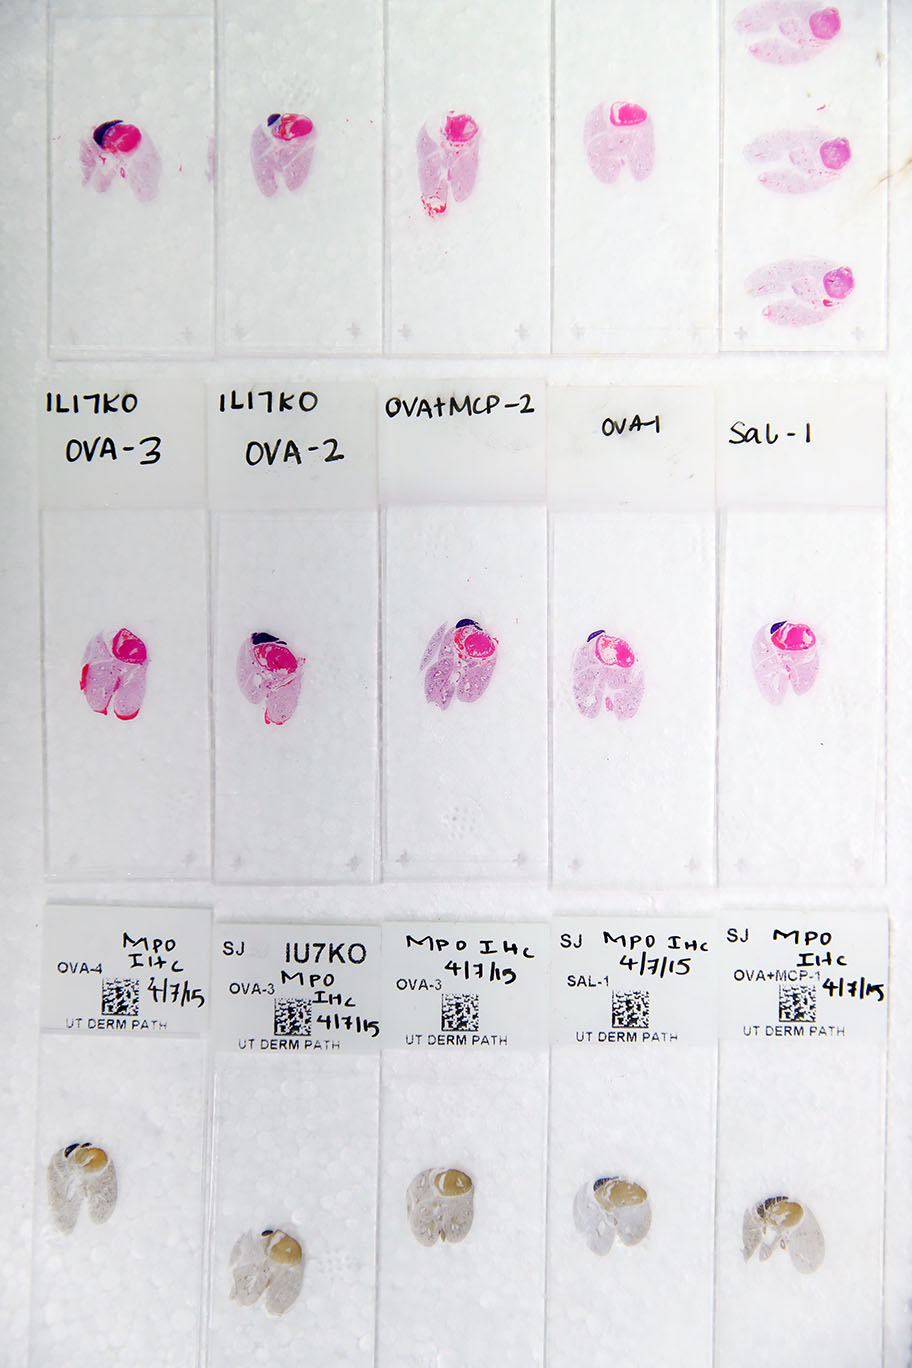 Histology slides to look for airways disease.